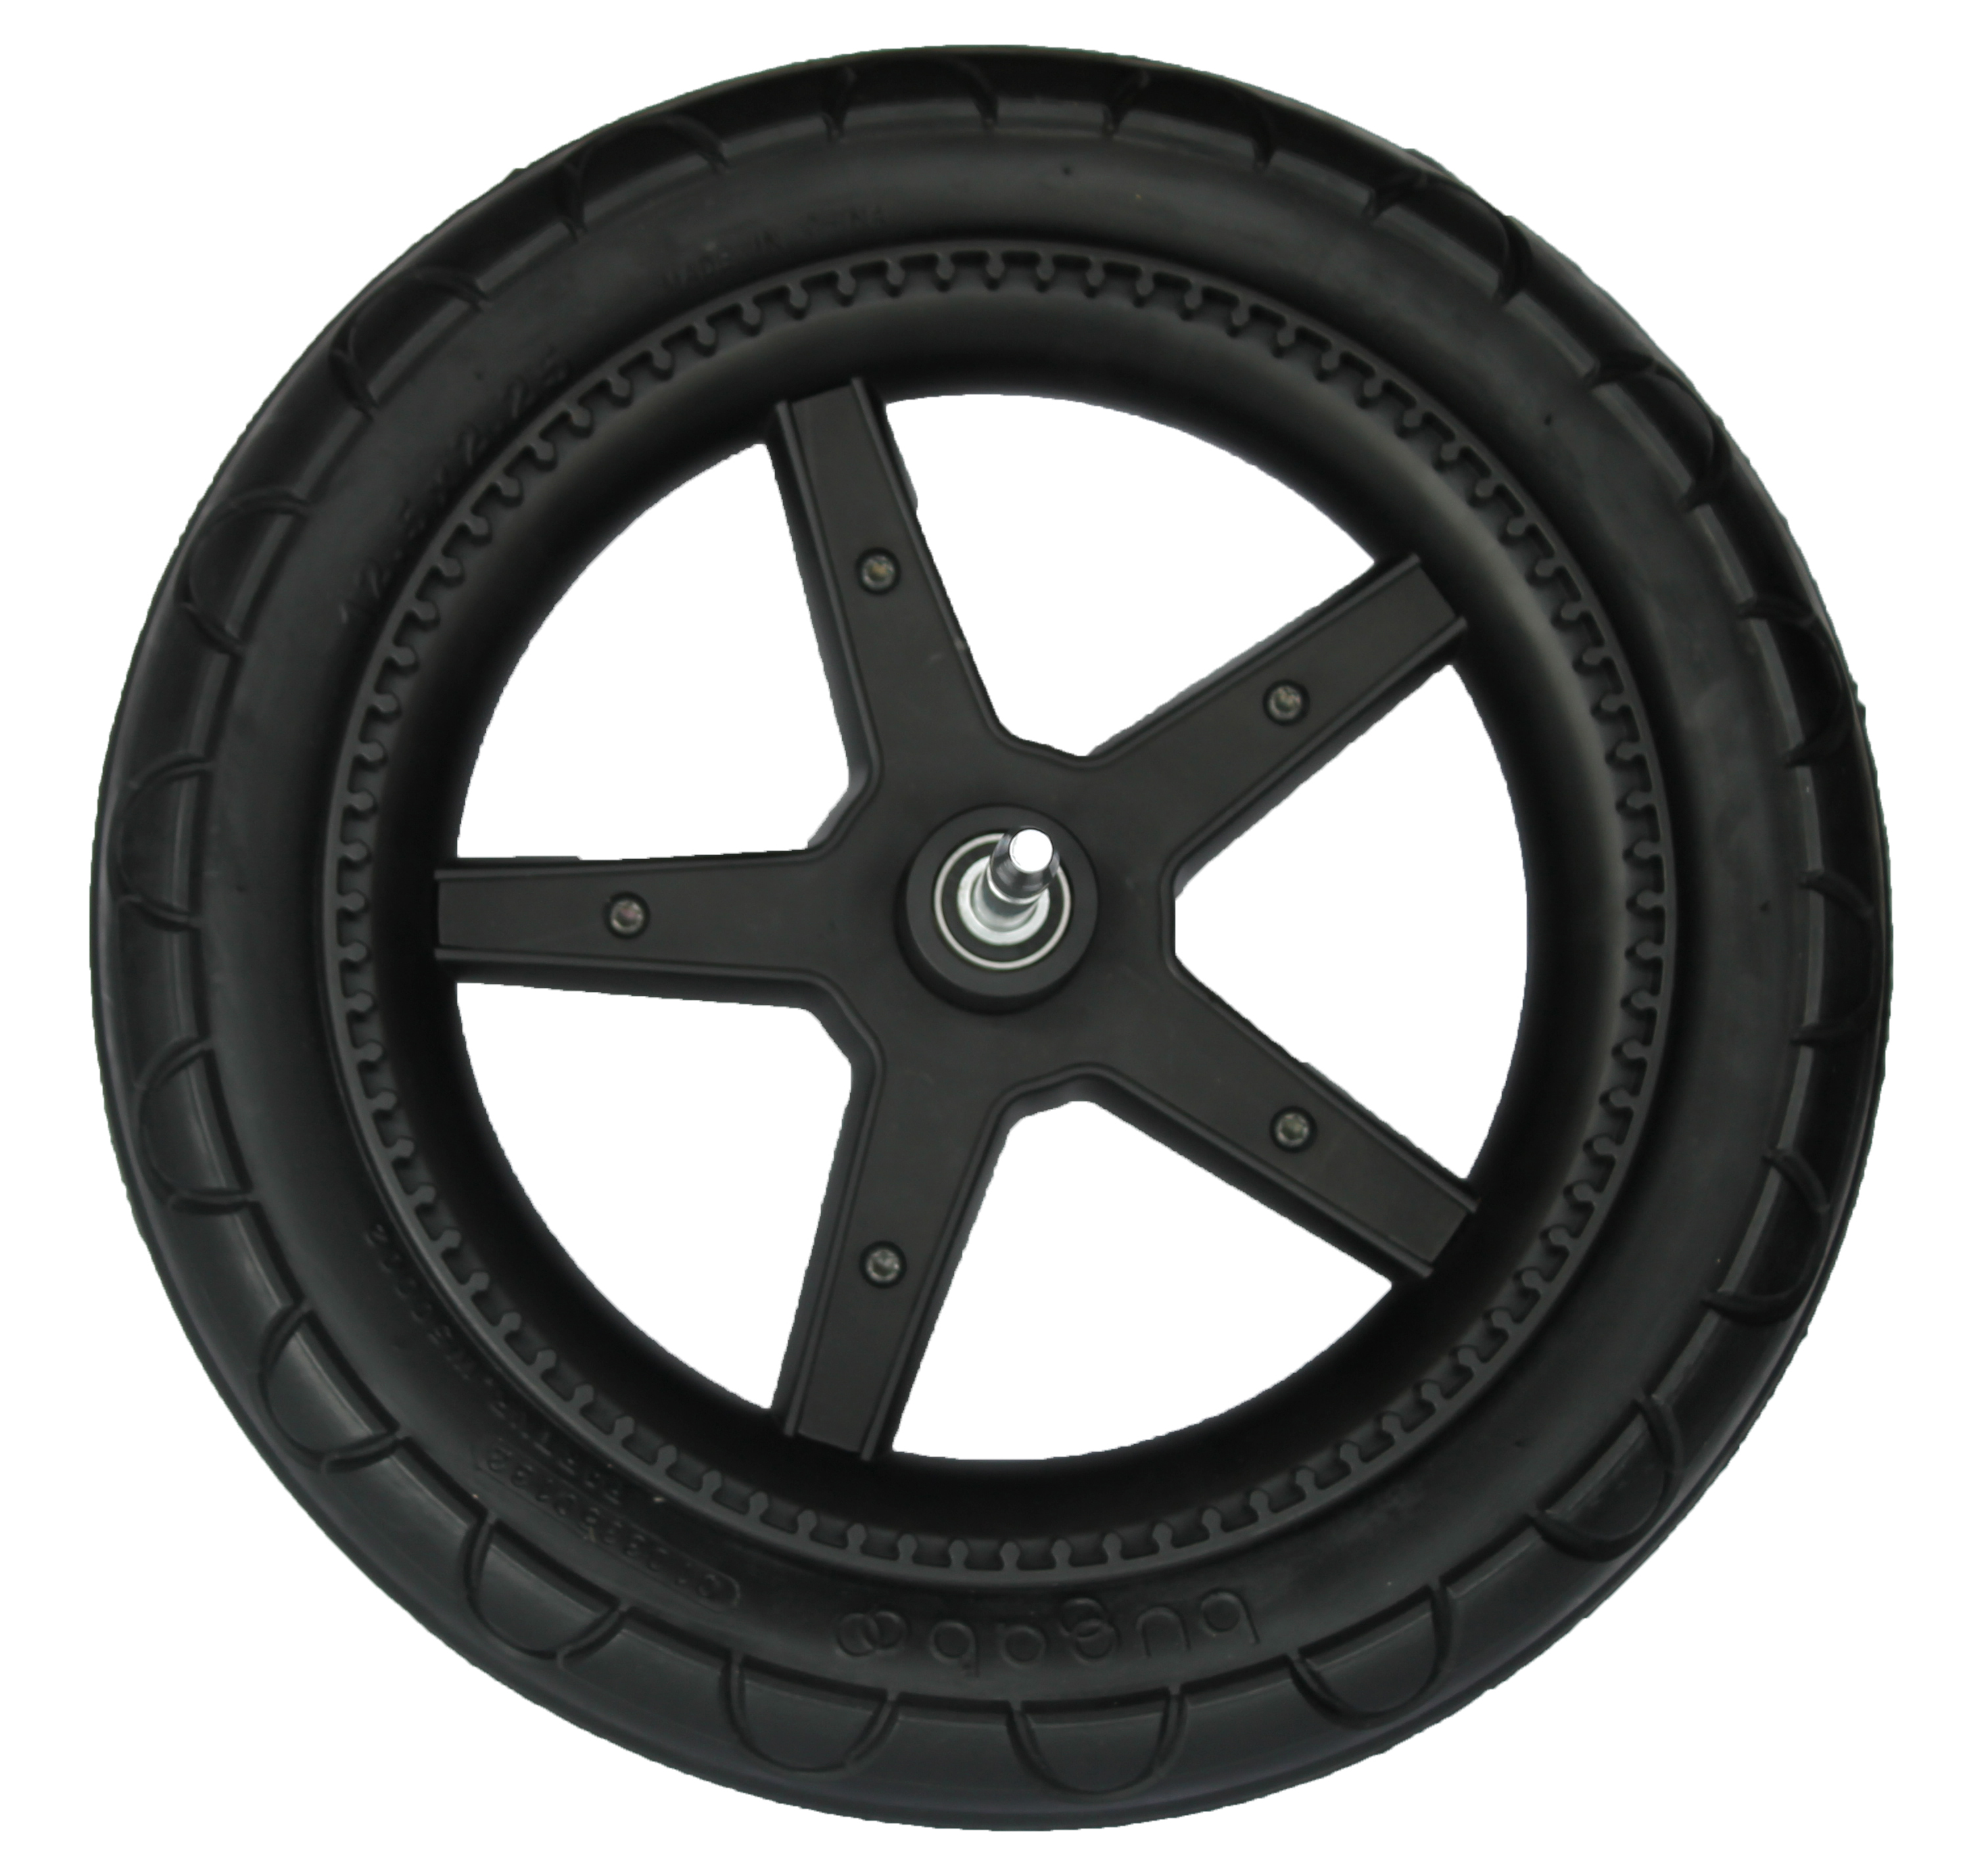 Tires Chinese polyurethane wheels, manufacturers of Chinese tires, car tires PU, solid tire supplier Chinese